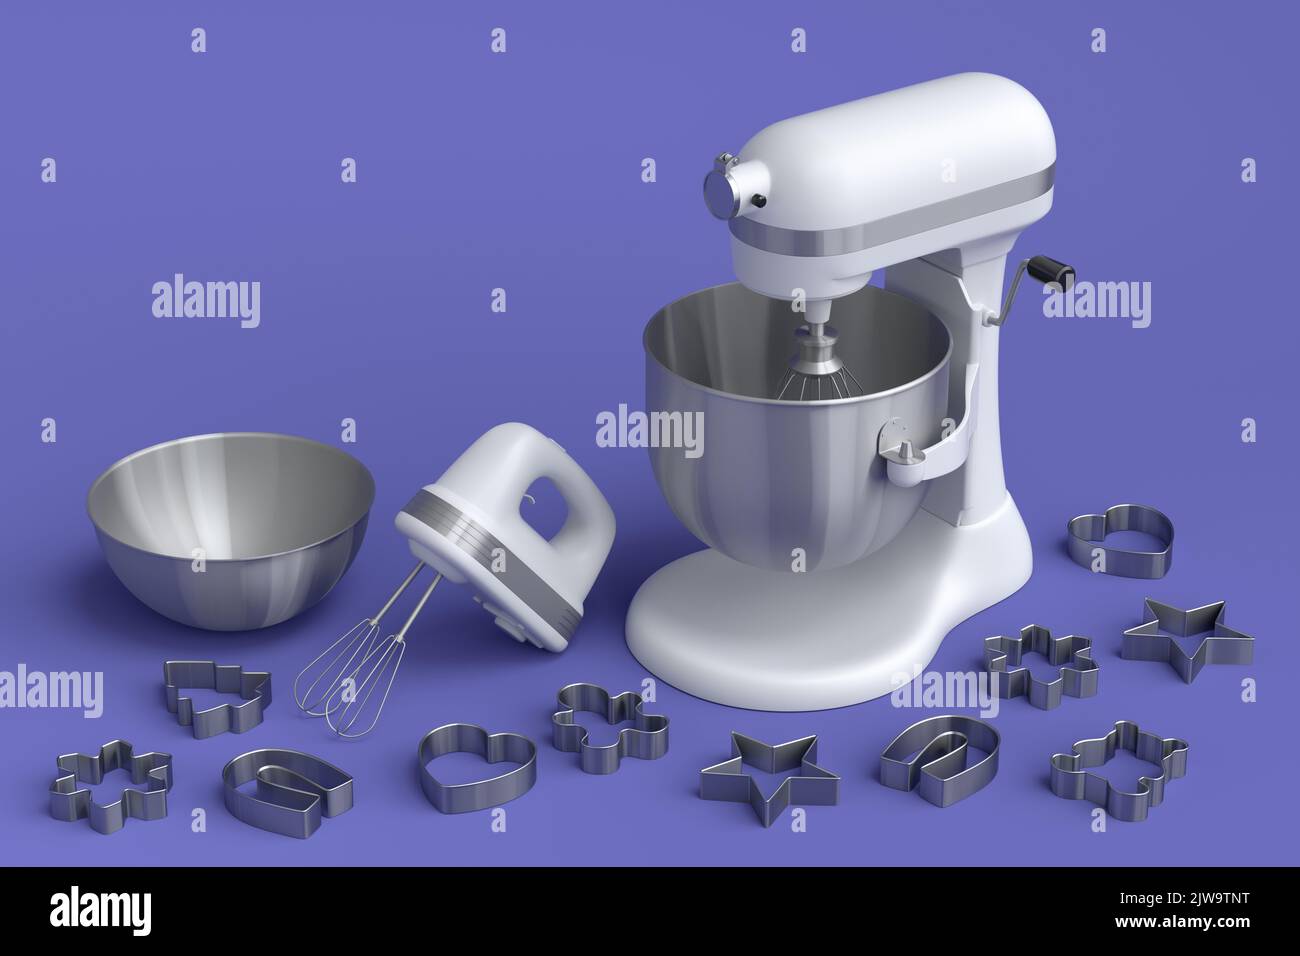 https://c8.alamy.com/comp/2JW9TNT/mixer-and-hand-mixer-with-kitchen-utensil-and-metal-cookie-cutters-for-preparation-of-dough-on-violet-background-3d-render-cooking-process-step-by-st-2JW9TNT.jpg